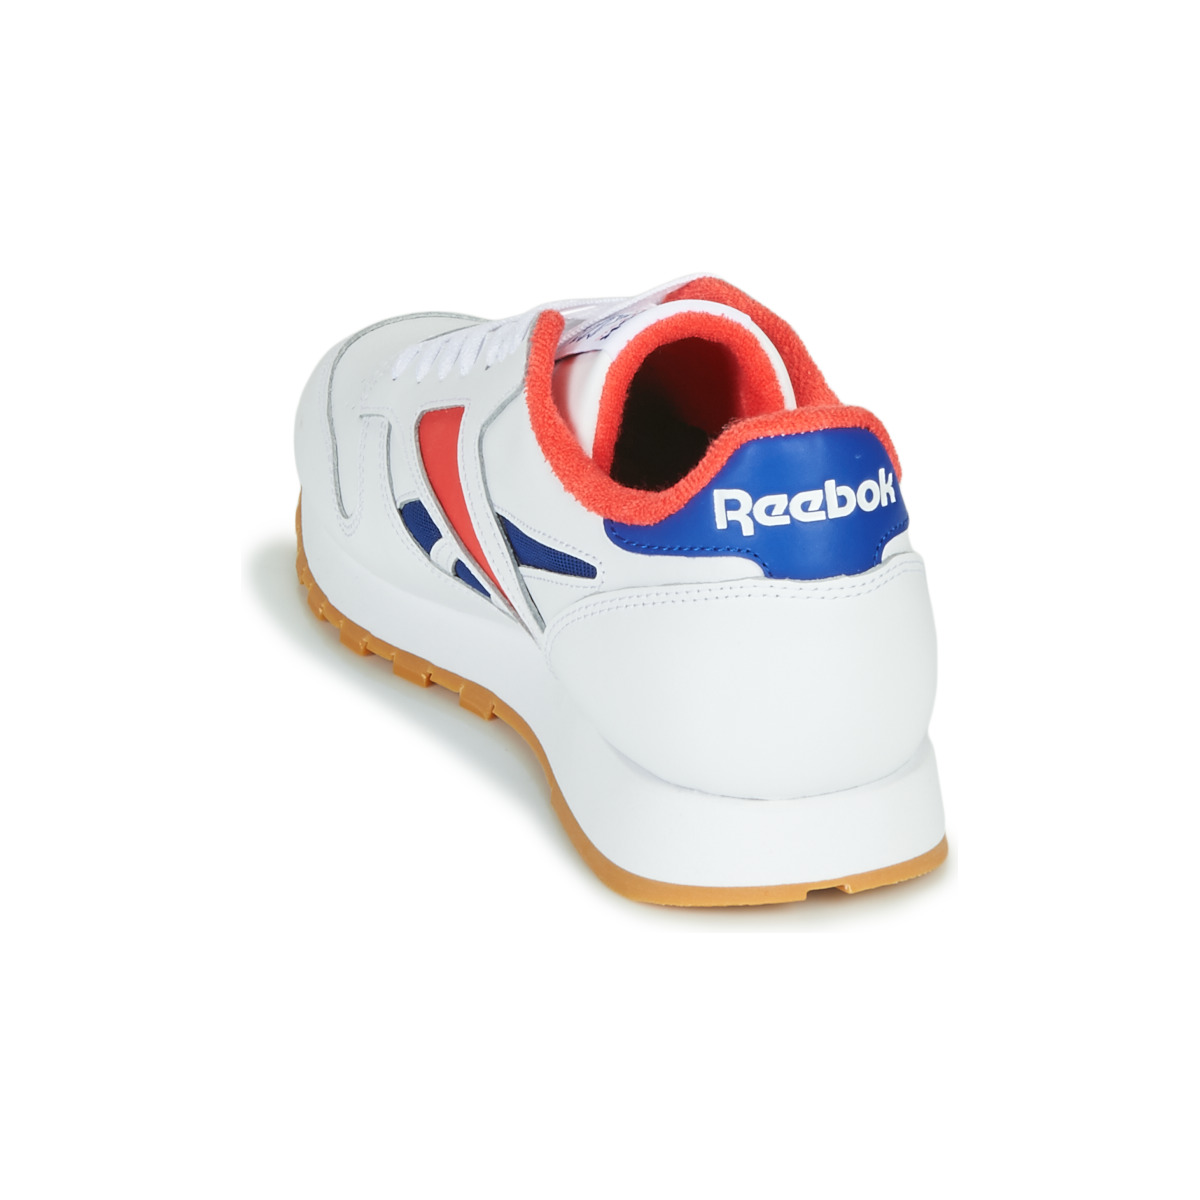 Reebok Classic Gris / Blanc / Rouge CL LEATHER MARK Vykxur1y